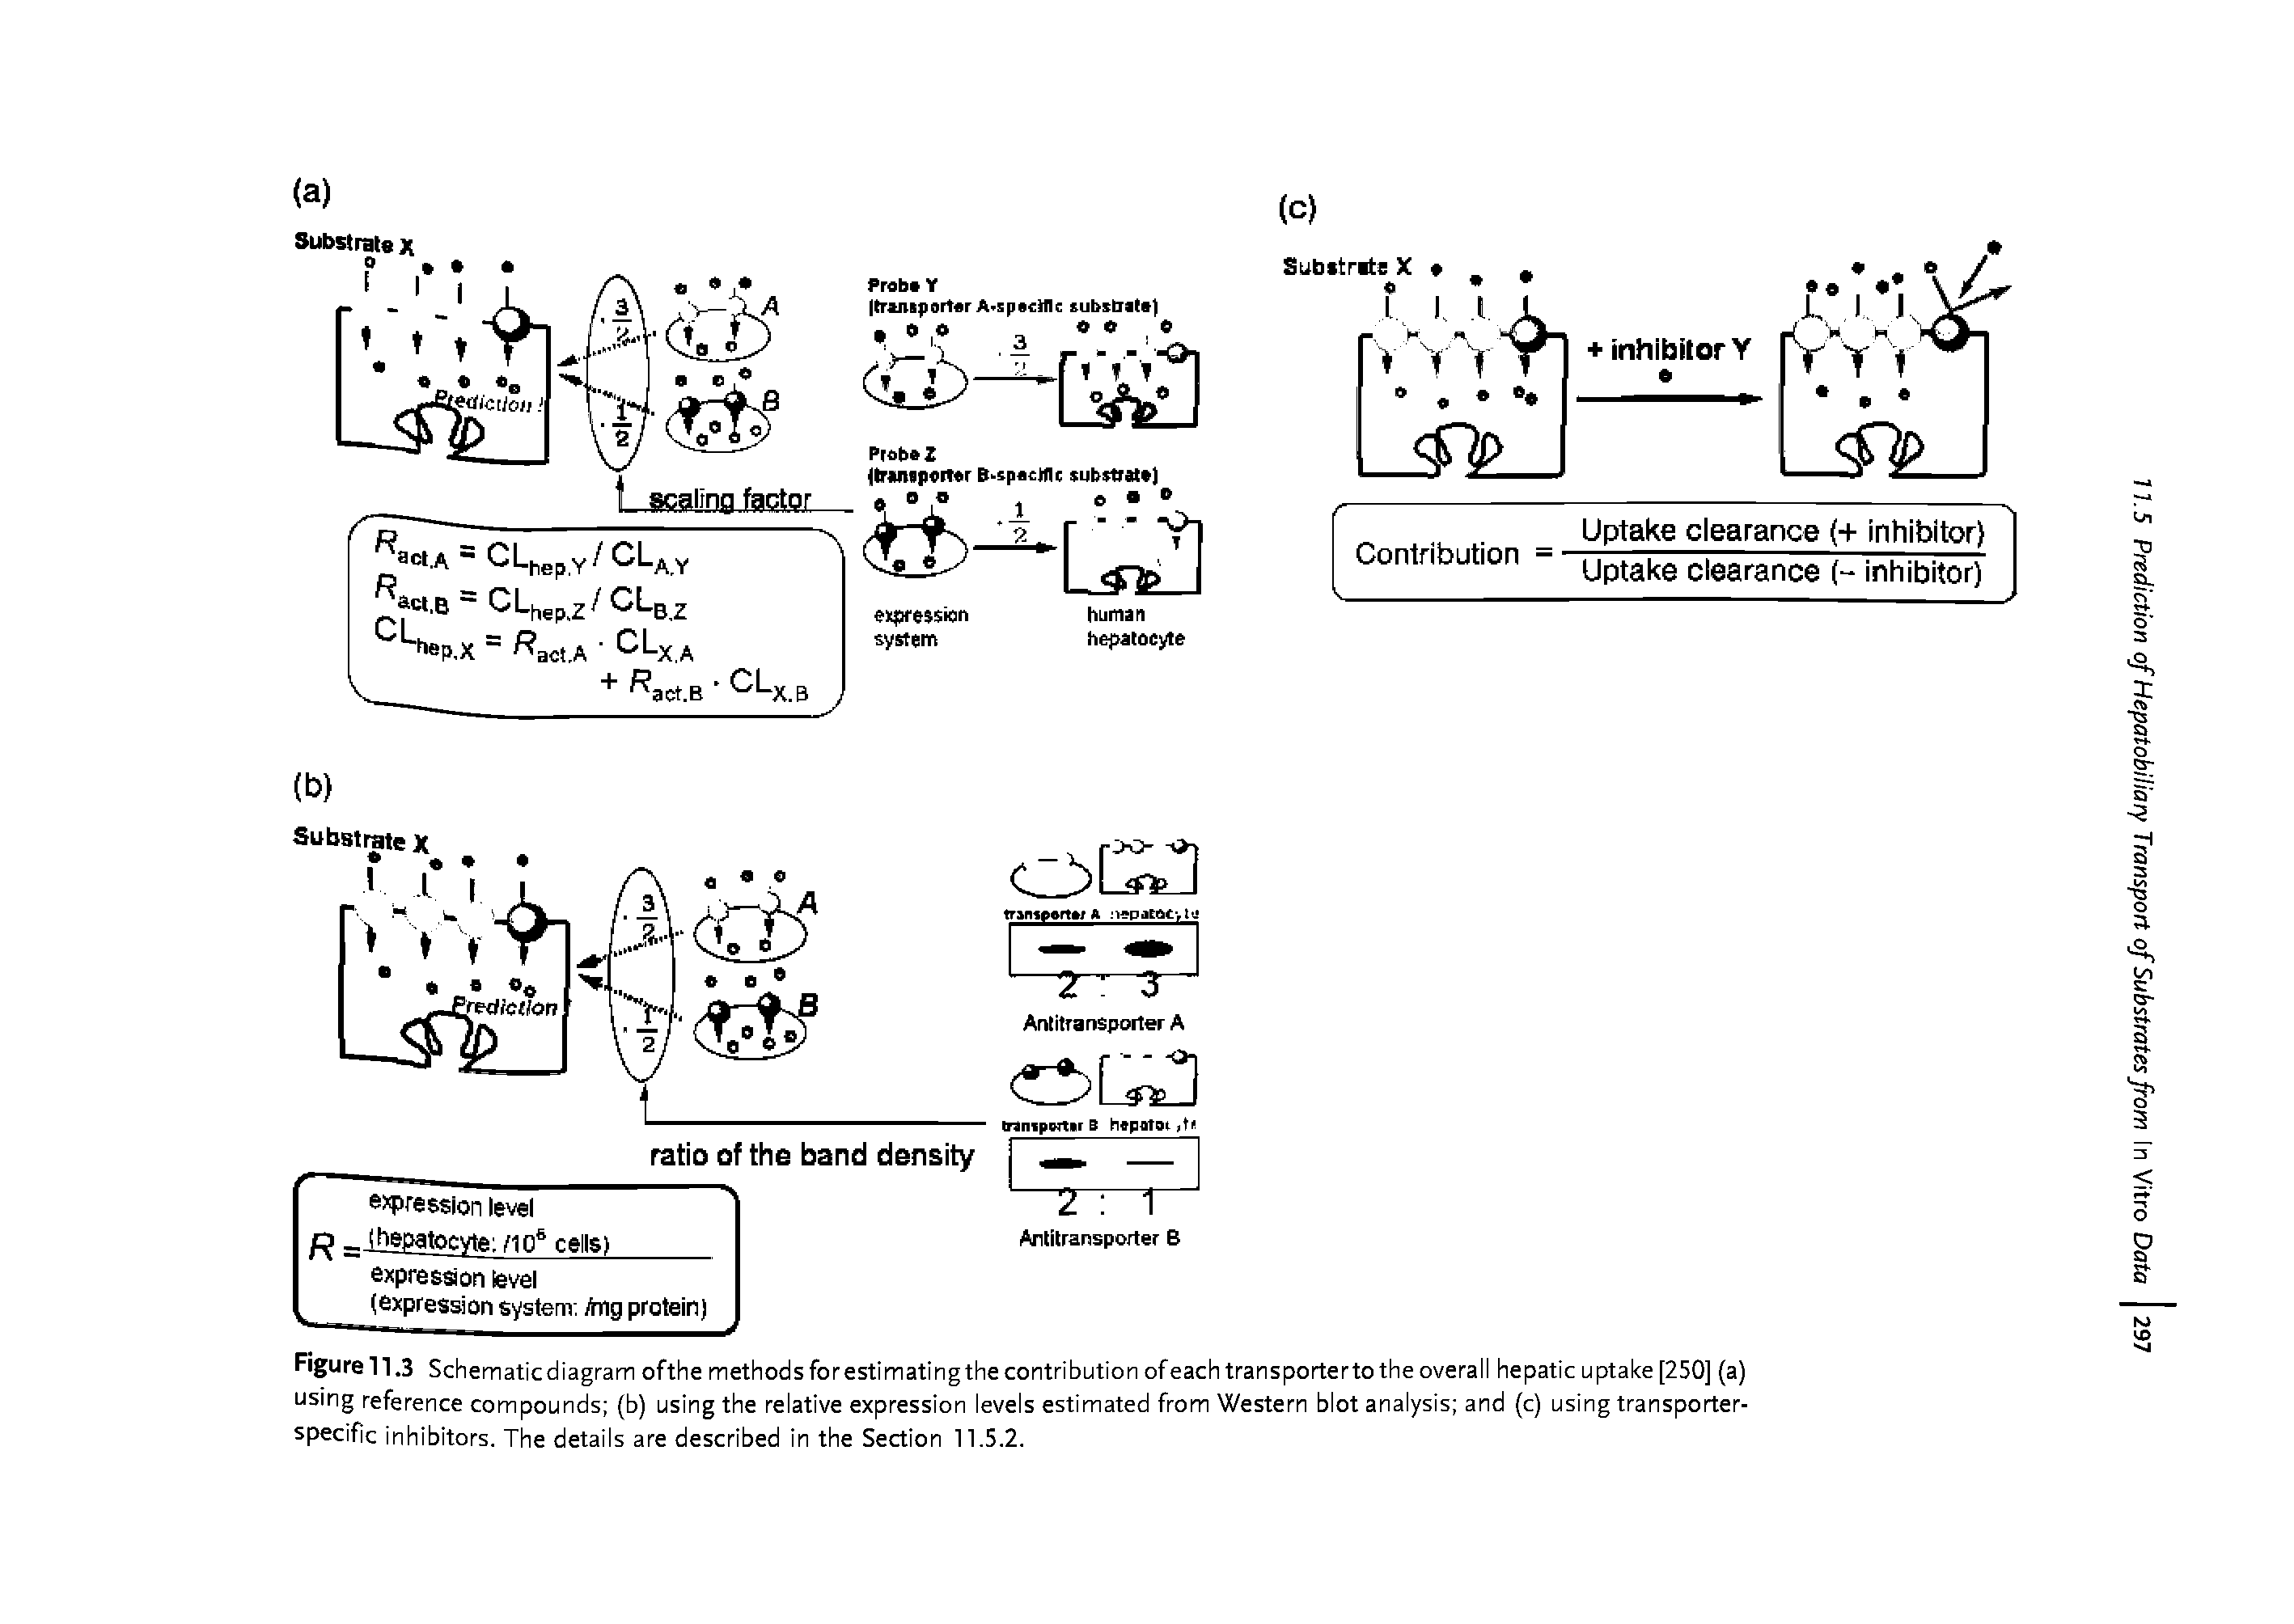 Figure 11.3 Schematic diagram ofthe methods for estimating the contribution of each transporter to the overall hepatic uptake [250] (a) using reference compounds (b) using the relative expression levels estimated from Western blot analysis and (c) using transporter-specific inhibitors. The details are described in the Section 11.5.2.